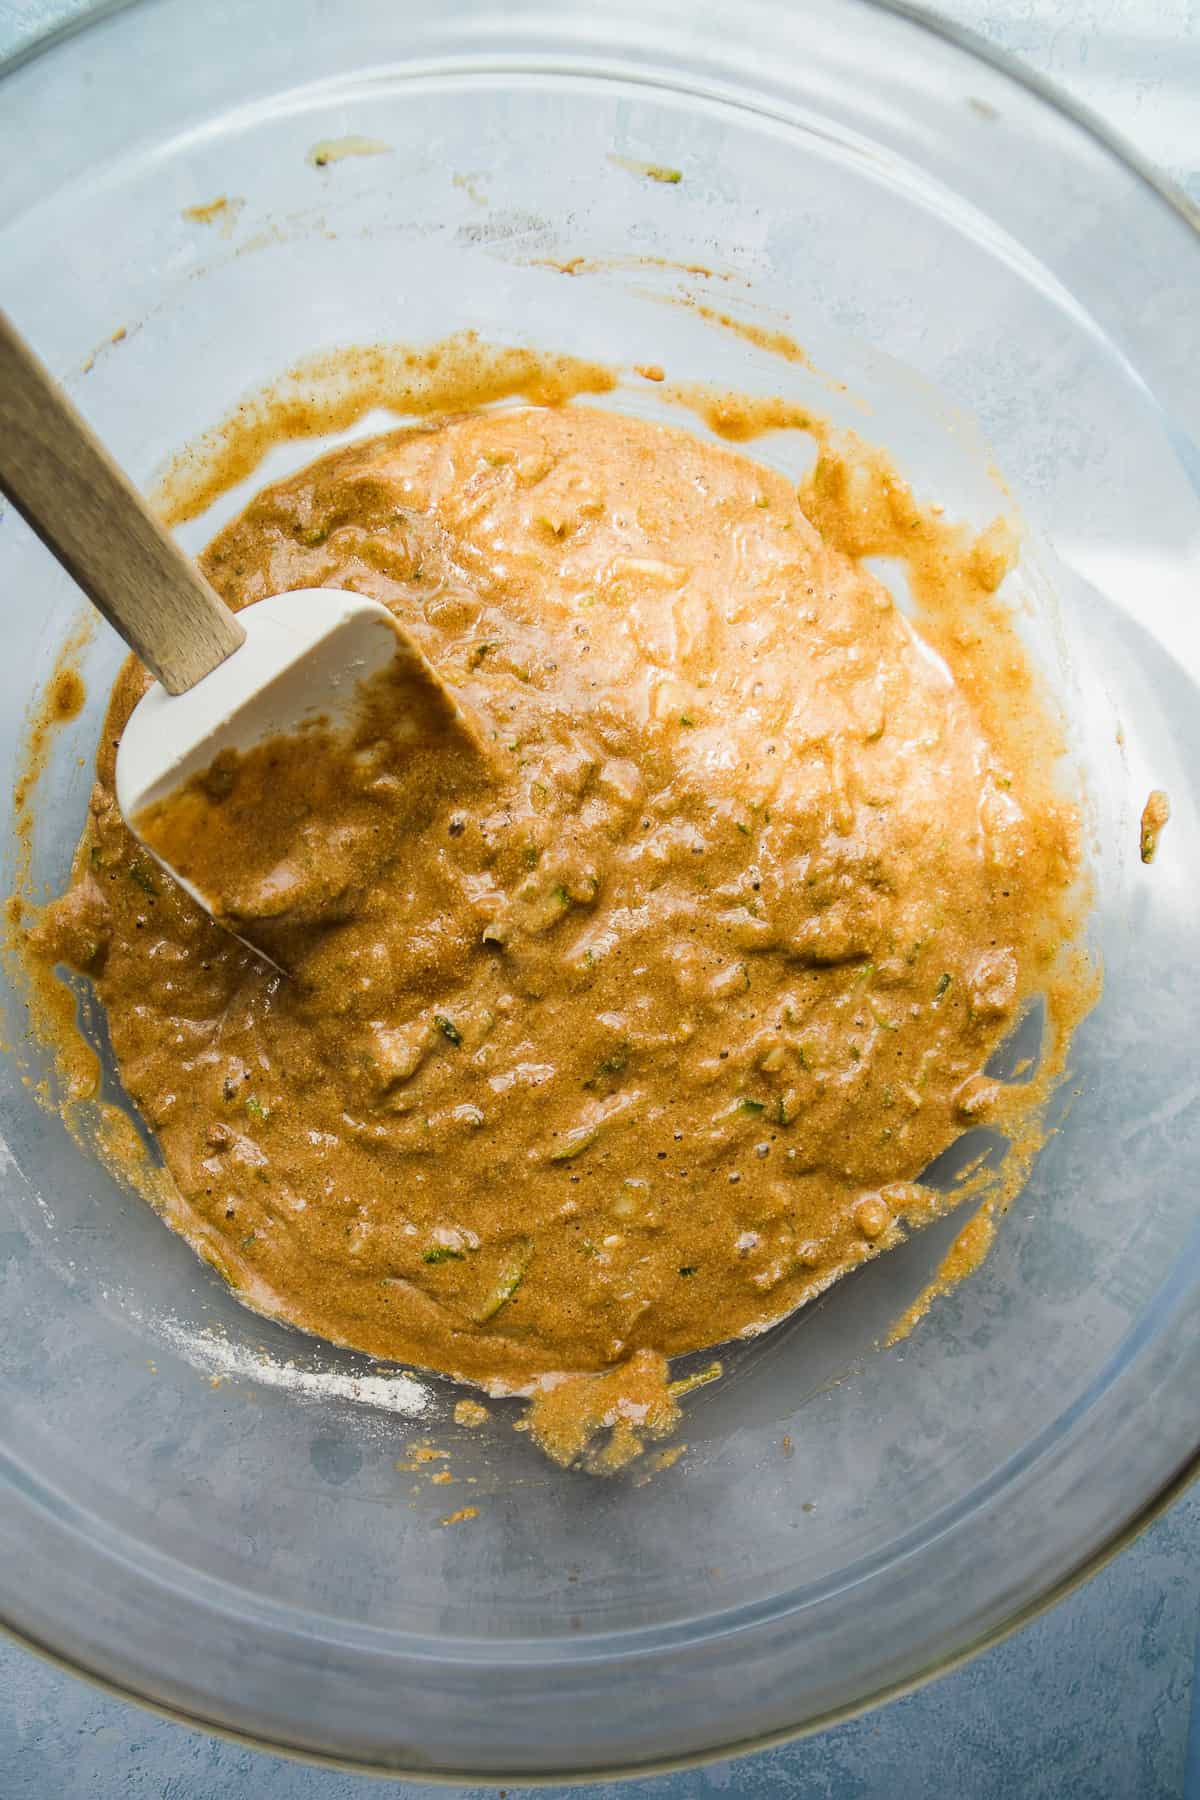 Zucchini muffin batter mixed in a large bowl.